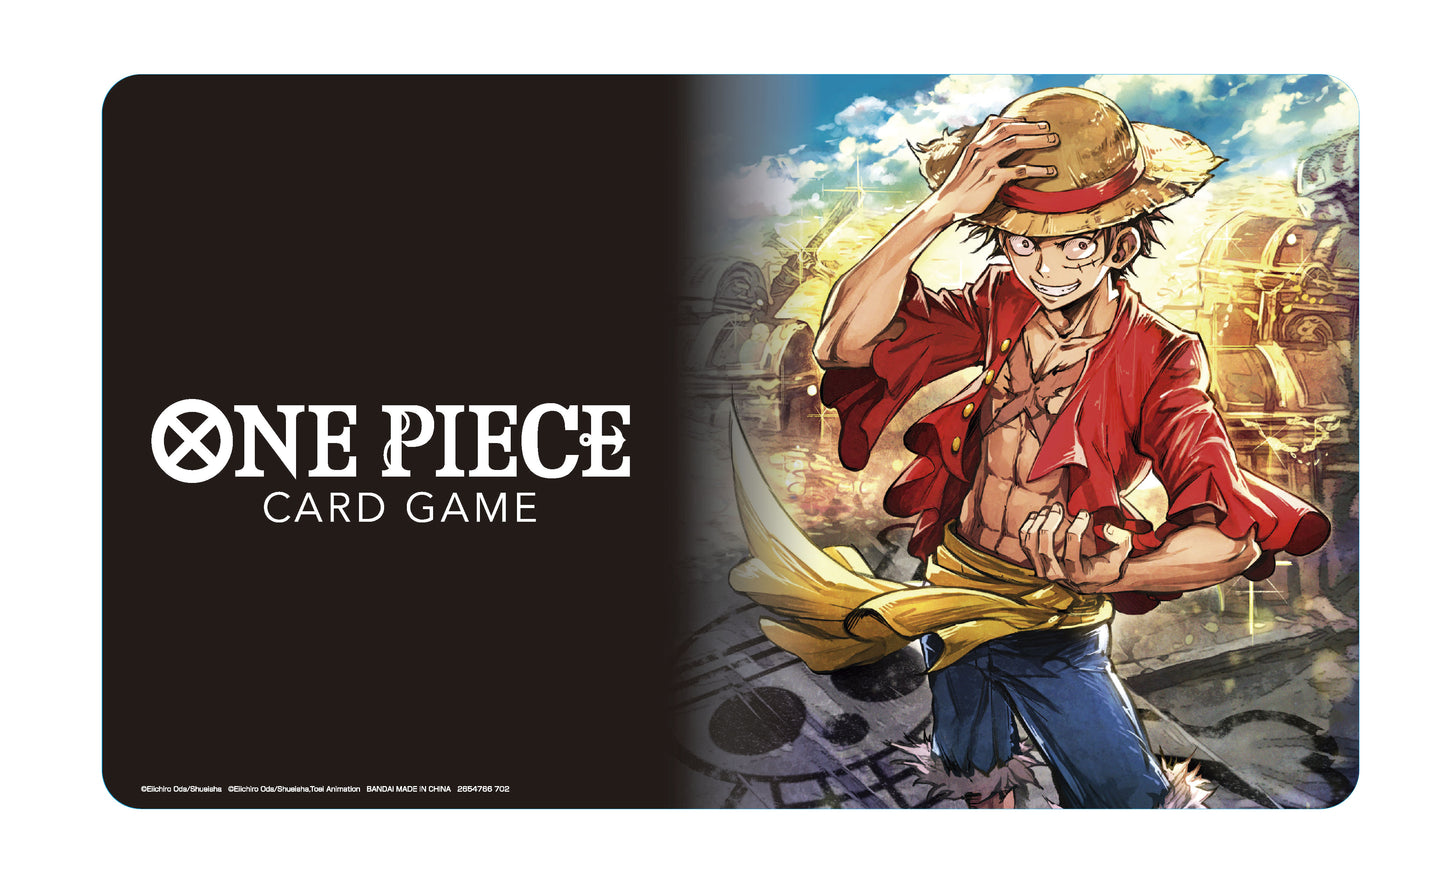 ONE PIECE CARD GAME Playmat and Storage Box Set -Monkey.D.Luffy-